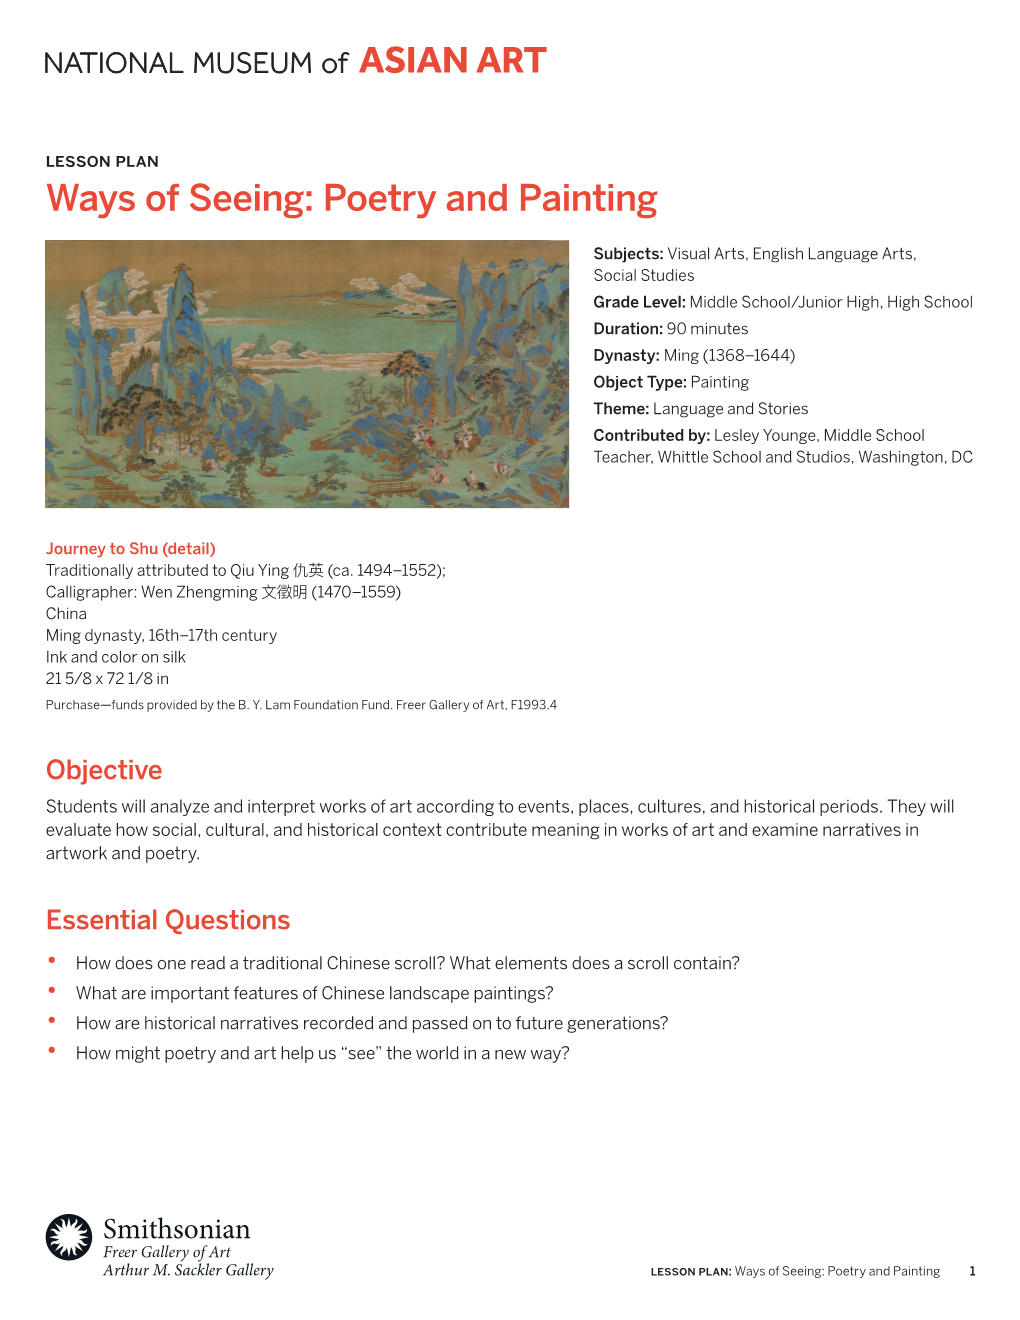 Ways of Seeing: Poetry and Painting